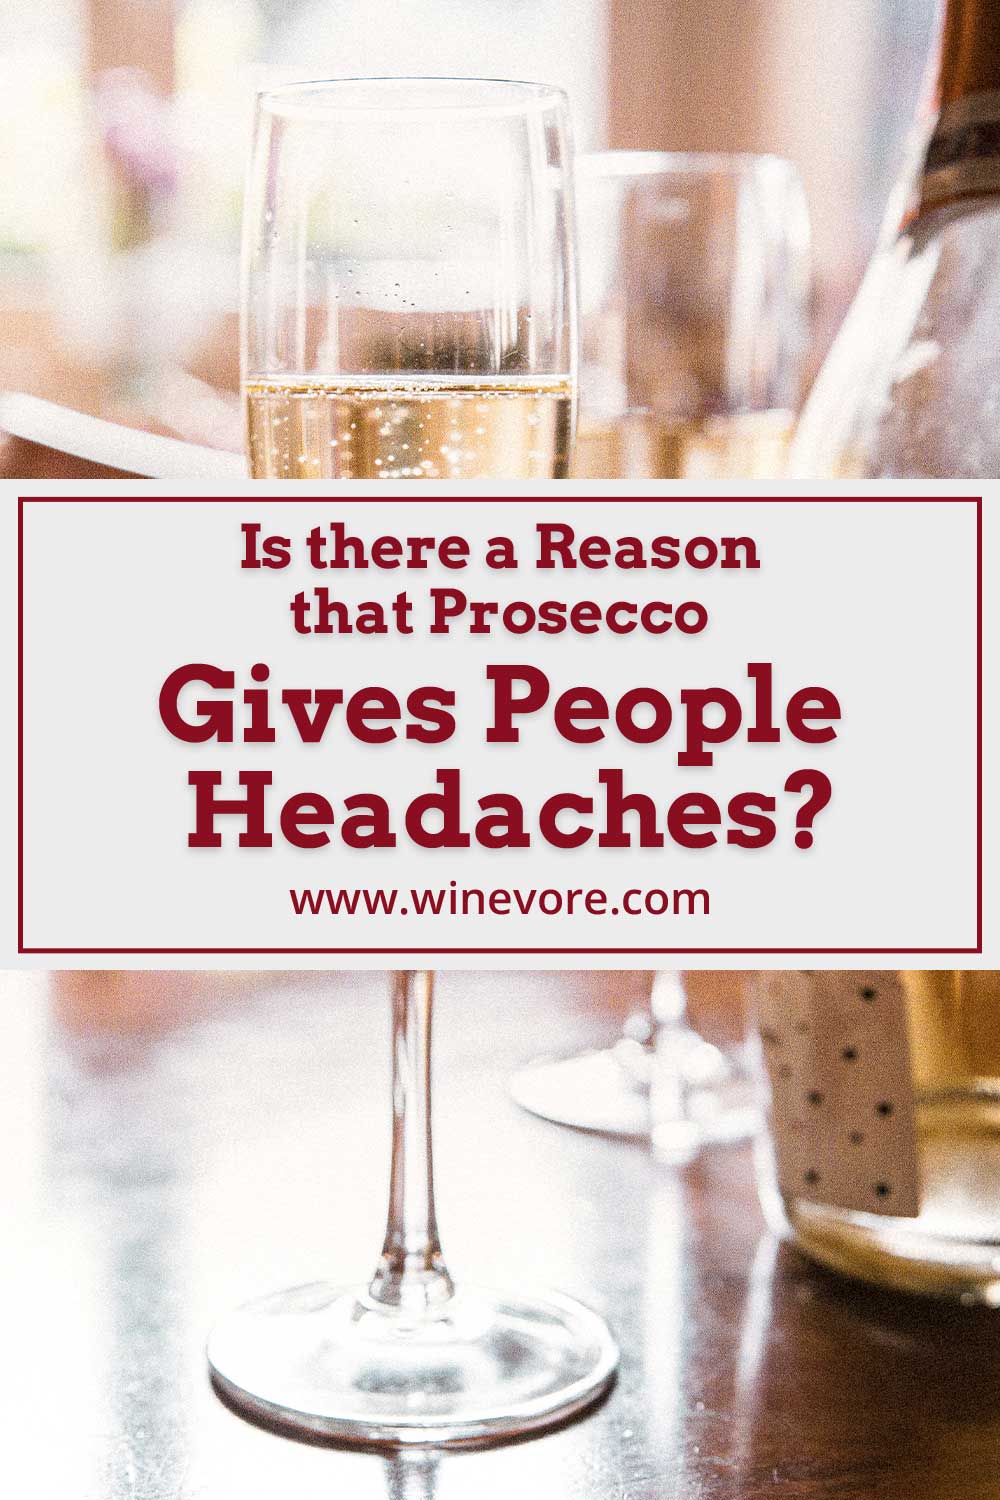 Wine glasses with a bottle on a wooden surface - Is there a Reason that Prosecco Gives People Headaches?